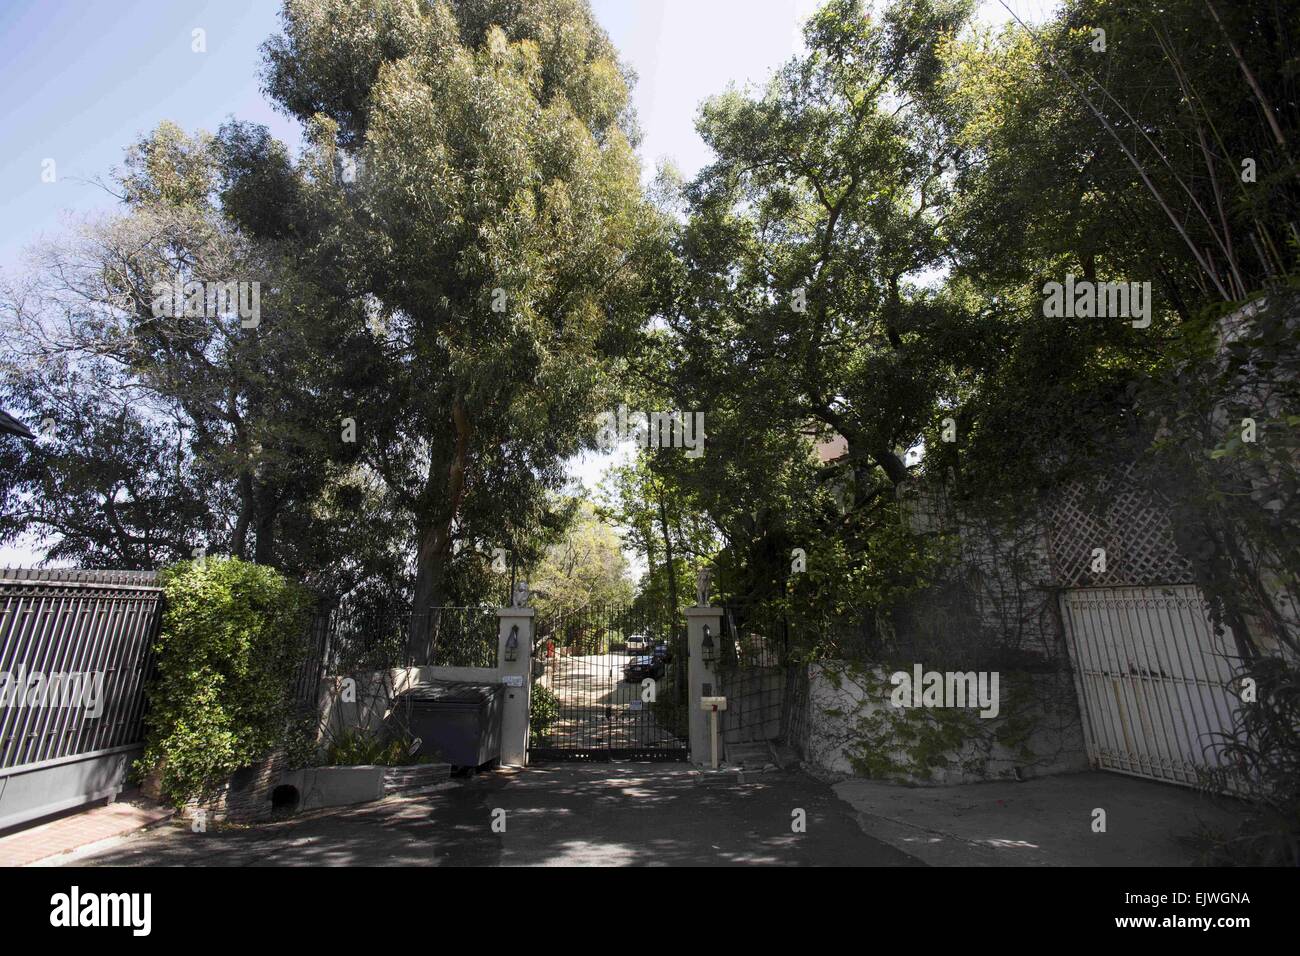 Los Angeles, California, USA. 1st Apr, 2015. The gate of the home of Andrew Getty is seen on Wednesday April 1, 2014 in Los Angeles. Getty, the 47-year-old, grandson of the late oil baron J. Paul Getty, who was found dead at his Hollywood Hills home, suffered from a serious medical condition that put him at ''grave risk of substantial and irreparable injury or death'' if his blood pressure were to suddenly rise, according to court papers obtained today. © Ringo Chiu/ZUMA Wire/Alamy Live News Stock Photo